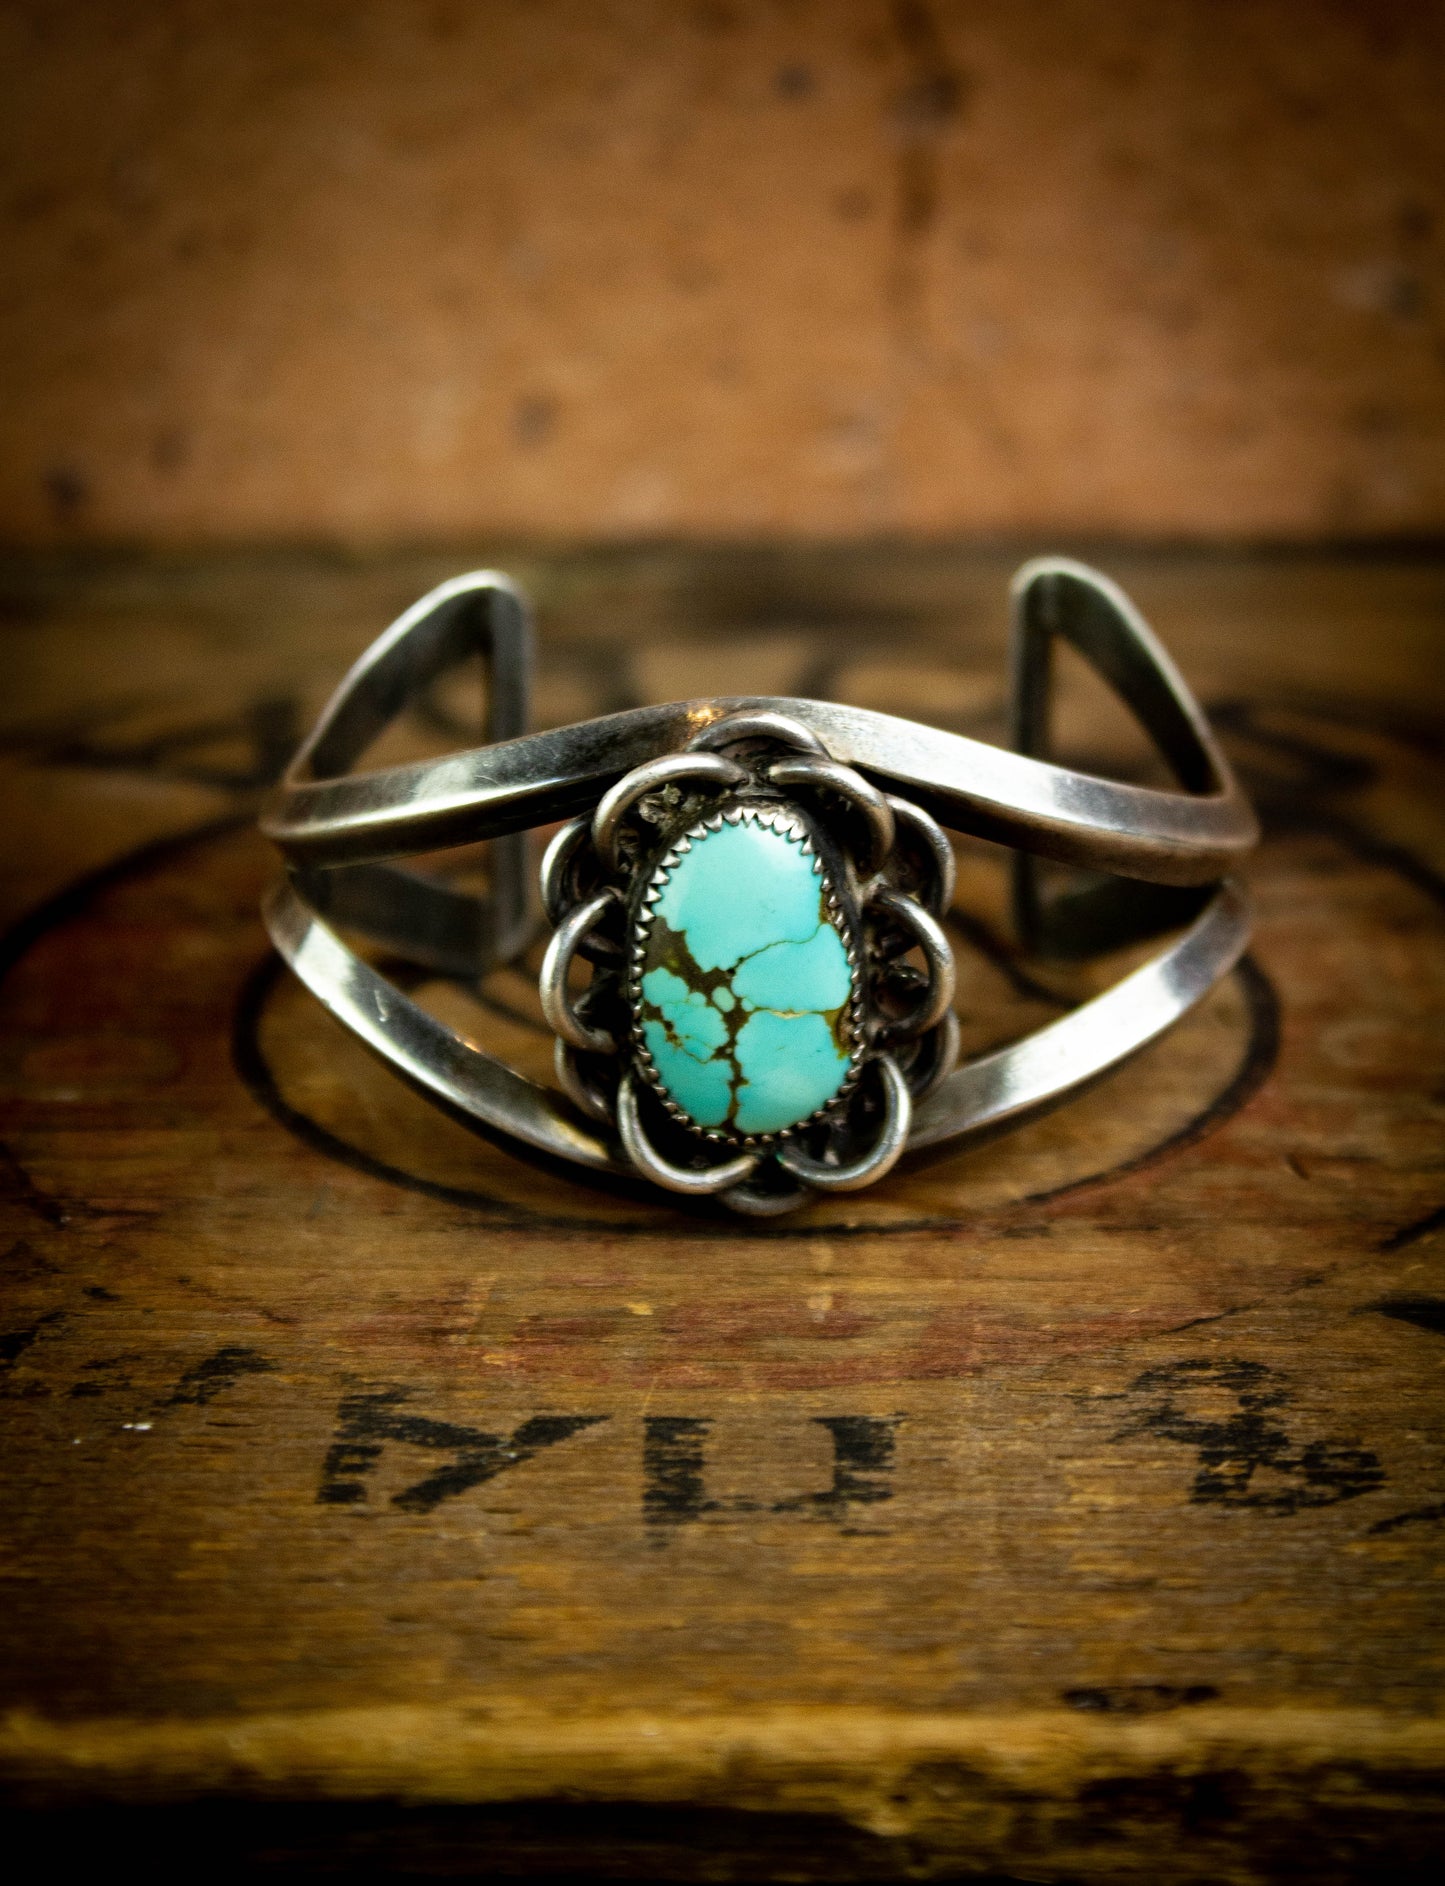 Vintage Silver and Turquoise Cuff Bracelet